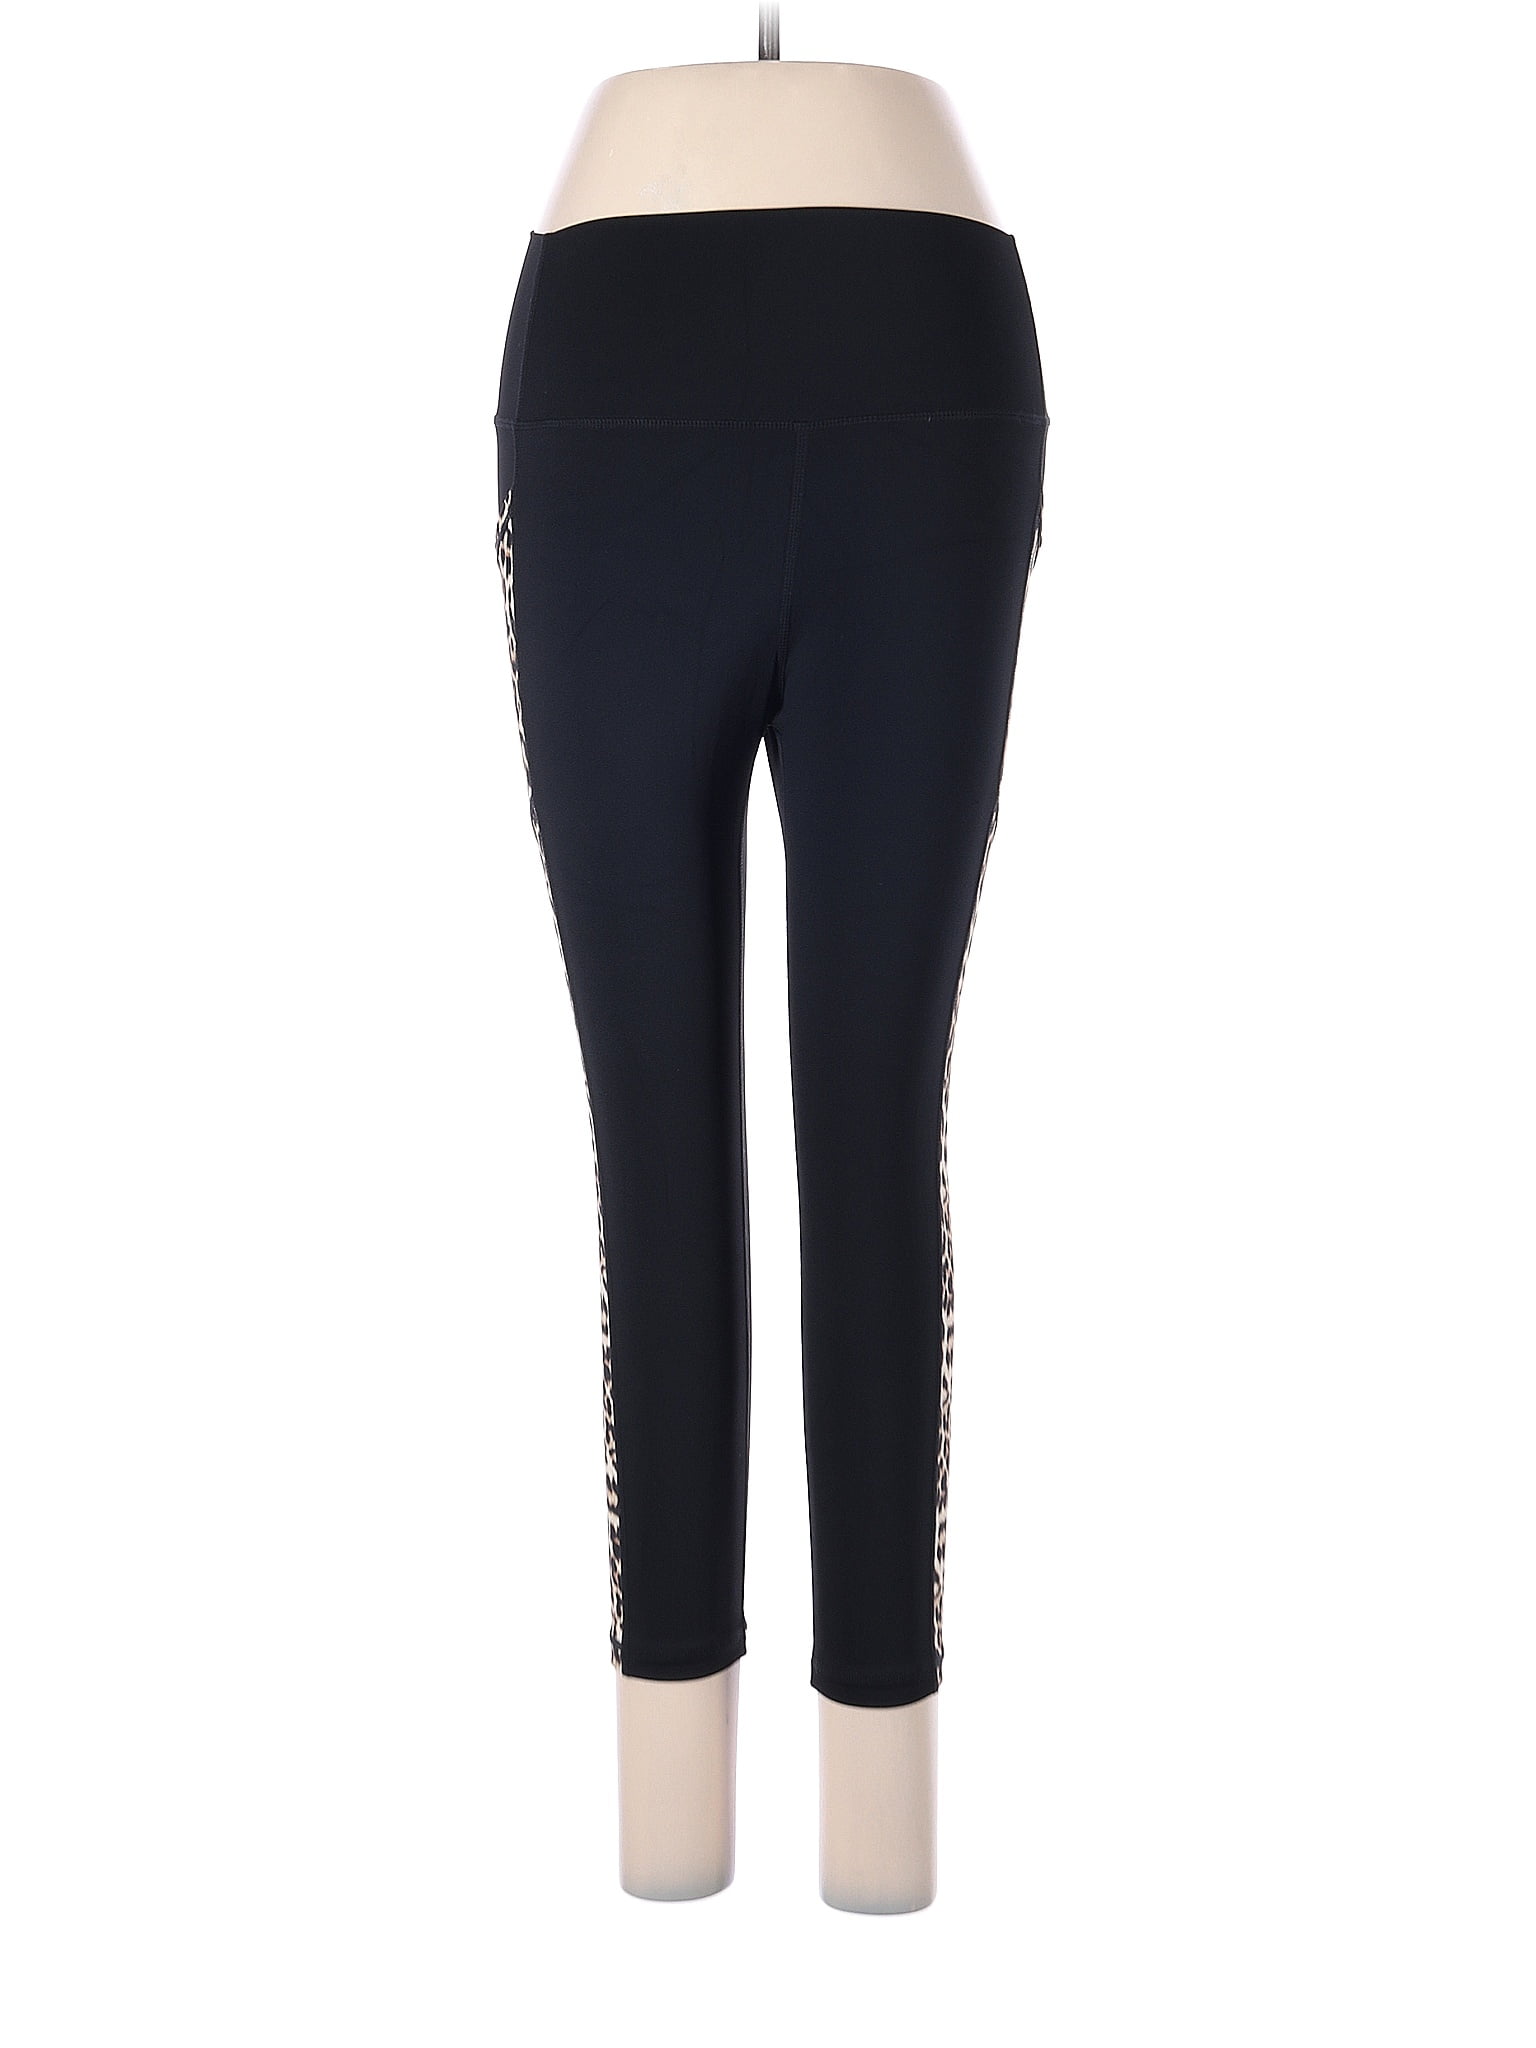 Zyia Active Black Silver Leggings Size 6 - 8 - 55% off